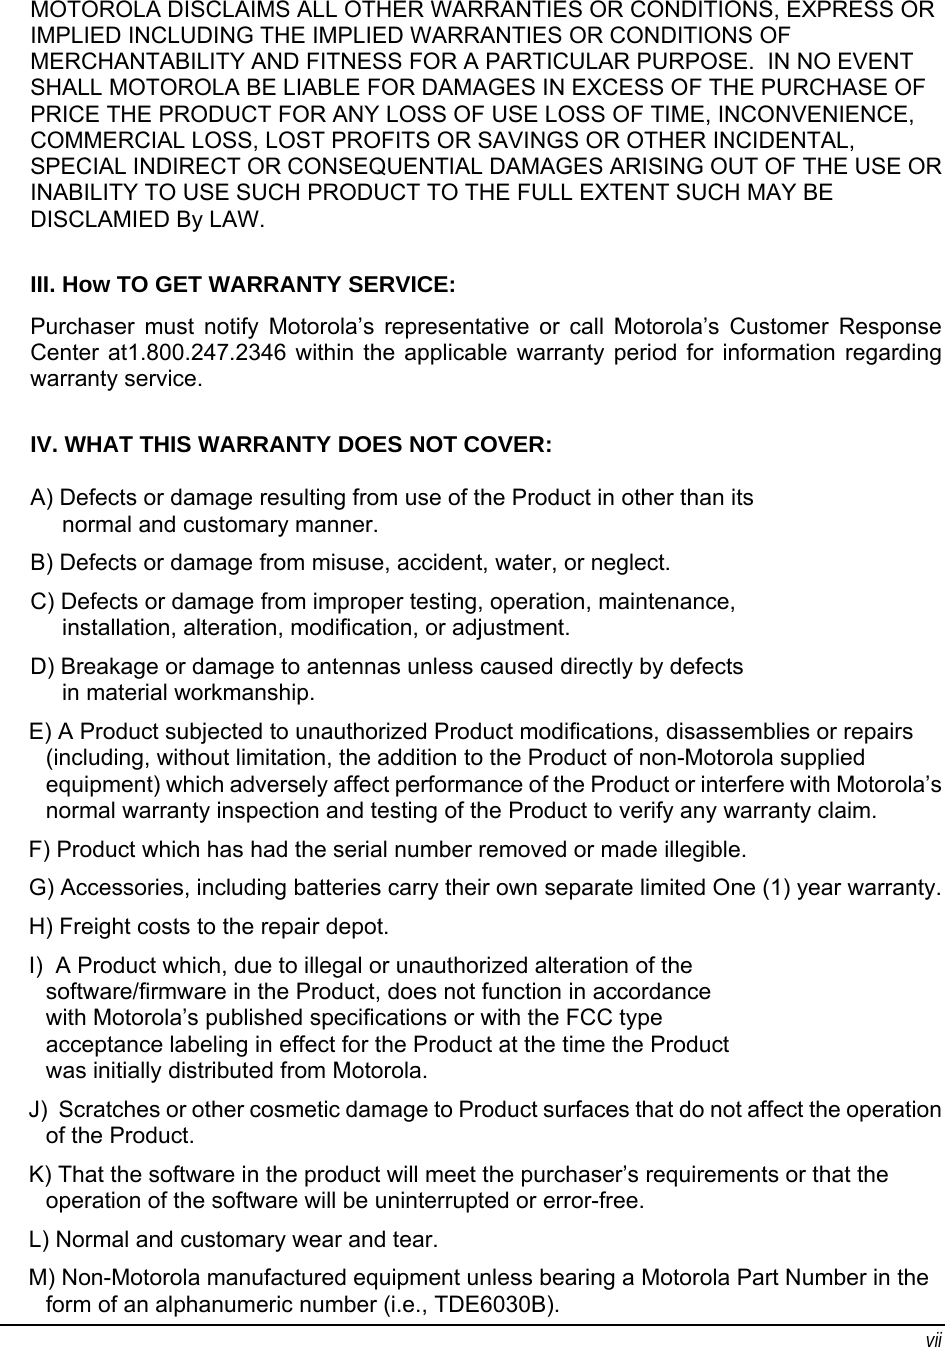 vii MOTOROLA DISCLAIMS ALL OTHER WARRANTIES OR CONDITIONS, EXPRESS OR IMPLIED INCLUDING THE IMPLIED WARRANTIES OR CONDITIONS OF MERCHANTABILITY AND FITNESS FOR A PARTICULAR PURPOSE.  IN NO EVENT SHALL MOTOROLA BE LIABLE FOR DAMAGES IN EXCESS OF THE PURCHASE OF PRICE THE PRODUCT FOR ANY LOSS OF USE LOSS OF TIME, INCONVENIENCE, COMMERCIAL LOSS, LOST PROFITS OR SAVINGS OR OTHER INCIDENTAL, SPECIAL INDIRECT OR CONSEQUENTIAL DAMAGES ARISING OUT OF THE USE OR INABILITY TO USE SUCH PRODUCT TO THE FULL EXTENT SUCH MAY BE DISCLAMIED By LAW.  III. How TO GET WARRANTY SERVICE: Purchaser must notify Motorola’s representative or call Motorola’s Customer Response Center at1.800.247.2346 within the applicable warranty period for information regarding warranty service.  IV. WHAT THIS WARRANTY DOES NOT COVER: A) Defects or damage resulting from use of the Product in other than its      normal and customary manner. B) Defects or damage from misuse, accident, water, or neglect. C) Defects or damage from improper testing, operation, maintenance,      installation, alteration, modification, or adjustment. D) Breakage or damage to antennas unless caused directly by defects      in material workmanship. E) A Product subjected to unauthorized Product modifications, disassemblies or repairs (including, without limitation, the addition to the Product of non-Motorola supplied equipment) which adversely affect performance of the Product or interfere with Motorola’s normal warranty inspection and testing of the Product to verify any warranty claim. F) Product which has had the serial number removed or made illegible. G) Accessories, including batteries carry their own separate limited One (1) year warranty. H) Freight costs to the repair depot. I)  A Product which, due to illegal or unauthorized alteration of the software/firmware in the Product, does not function in accordance with Motorola’s published specifications or with the FCC type acceptance labeling in effect for the Product at the time the Product was initially distributed from Motorola. J)  Scratches or other cosmetic damage to Product surfaces that do not affect the operation of the Product. K) That the software in the product will meet the purchaser’s requirements or that the operation of the software will be uninterrupted or error-free. L) Normal and customary wear and tear. M) Non-Motorola manufactured equipment unless bearing a Motorola Part Number in the form of an alphanumeric number (i.e., TDE6030B). 